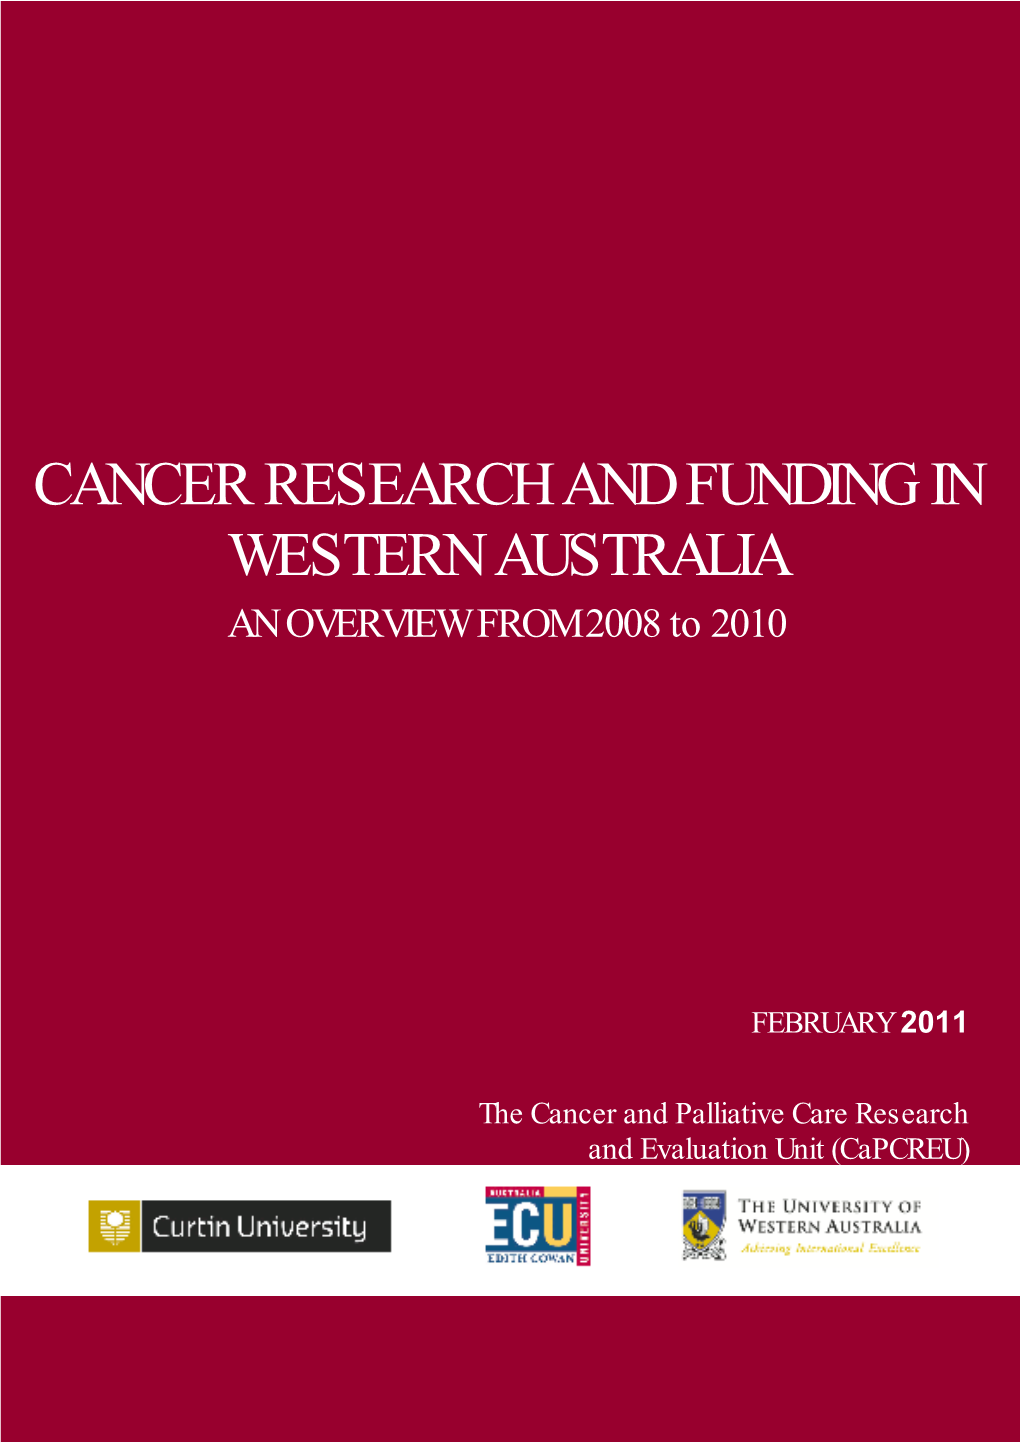 Cancer Research and Funding in Western Australia: an Overview from 2008-2010 Project Was Jointly Funded by the Western Australian